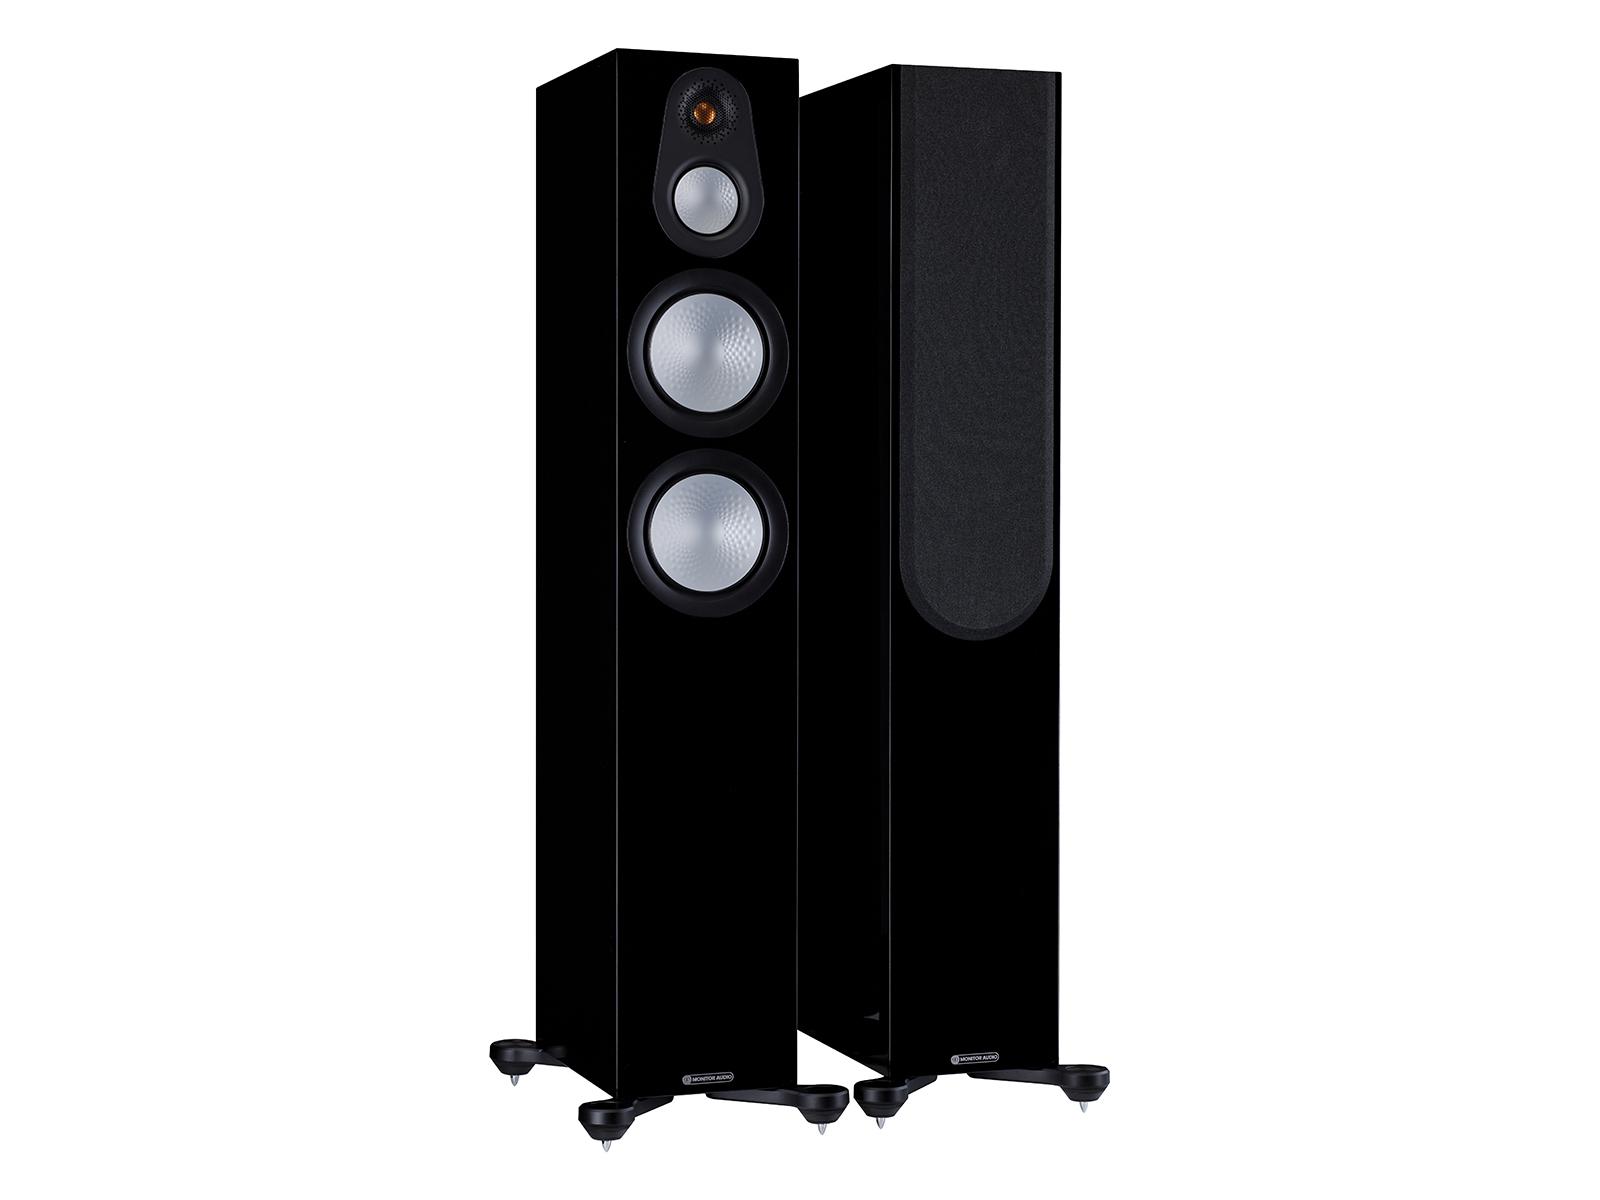 A pair of Monitor Audio's Silver 300 7G, in a high gloss black finish, iso view, with and without grilles.